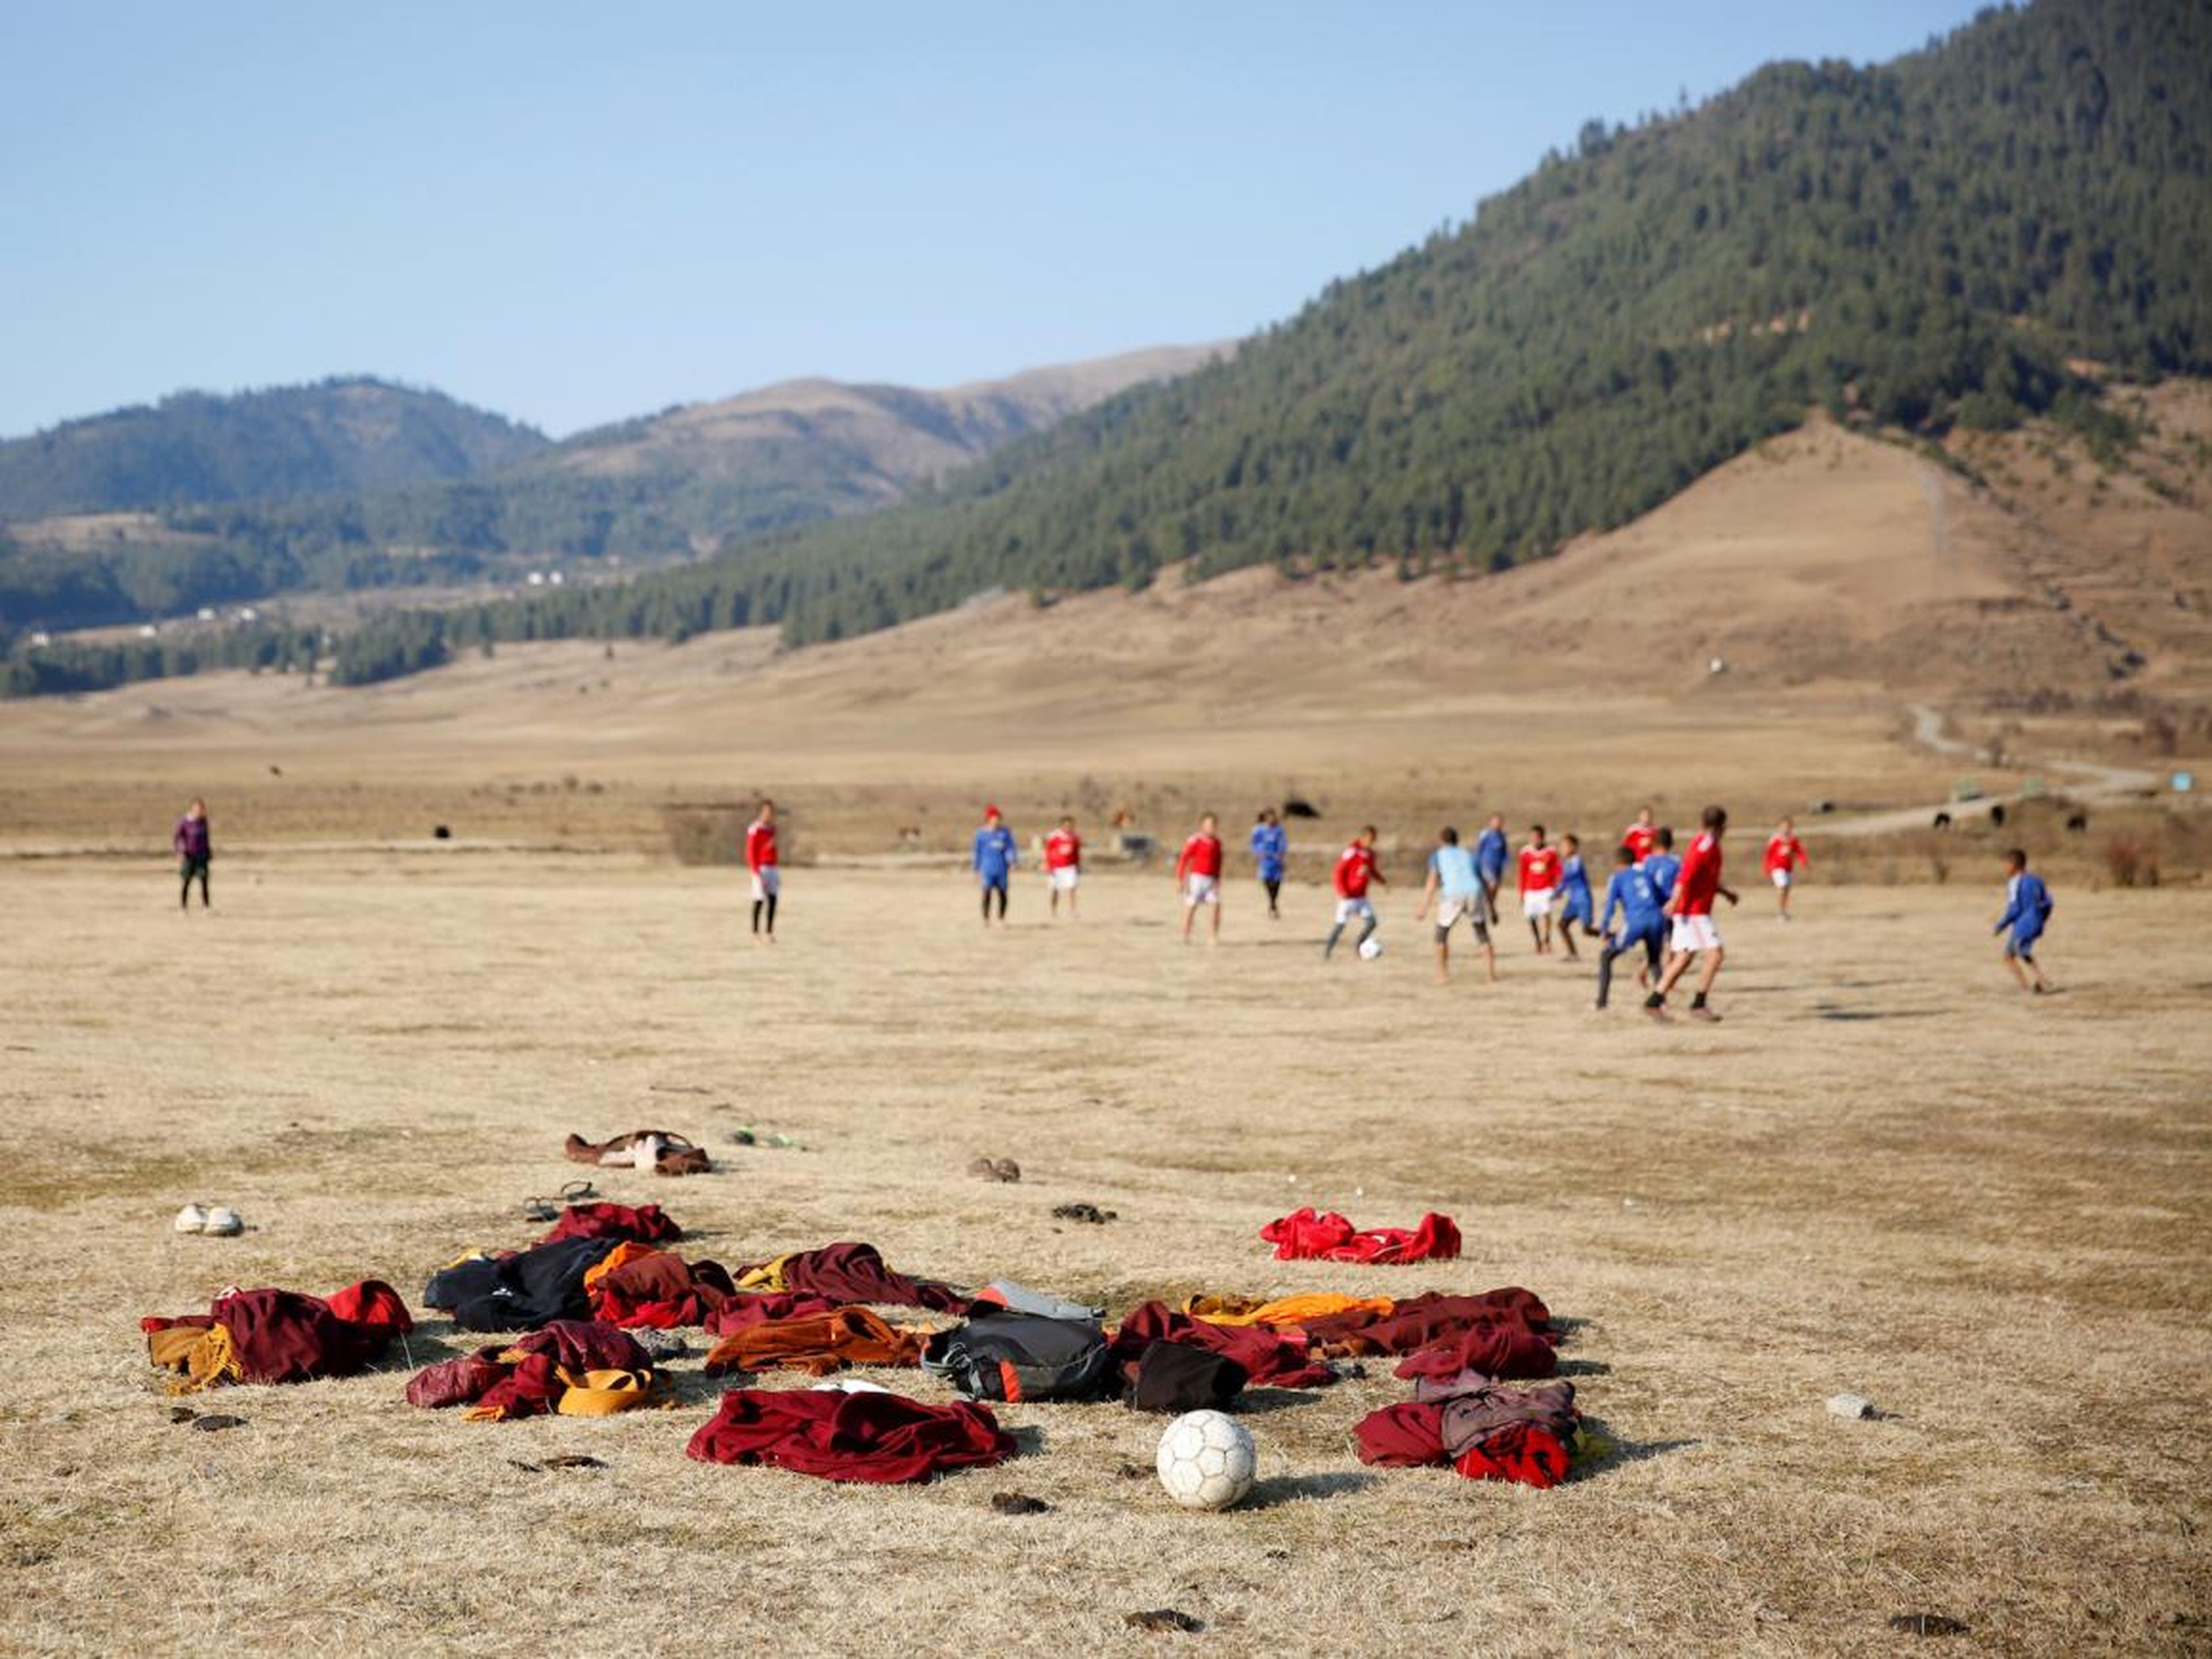 Every day, monks in the Phobjikha Valley take off their crimson robes in favor of Manchester United and Chelsea jerseys to play a game of soccer.